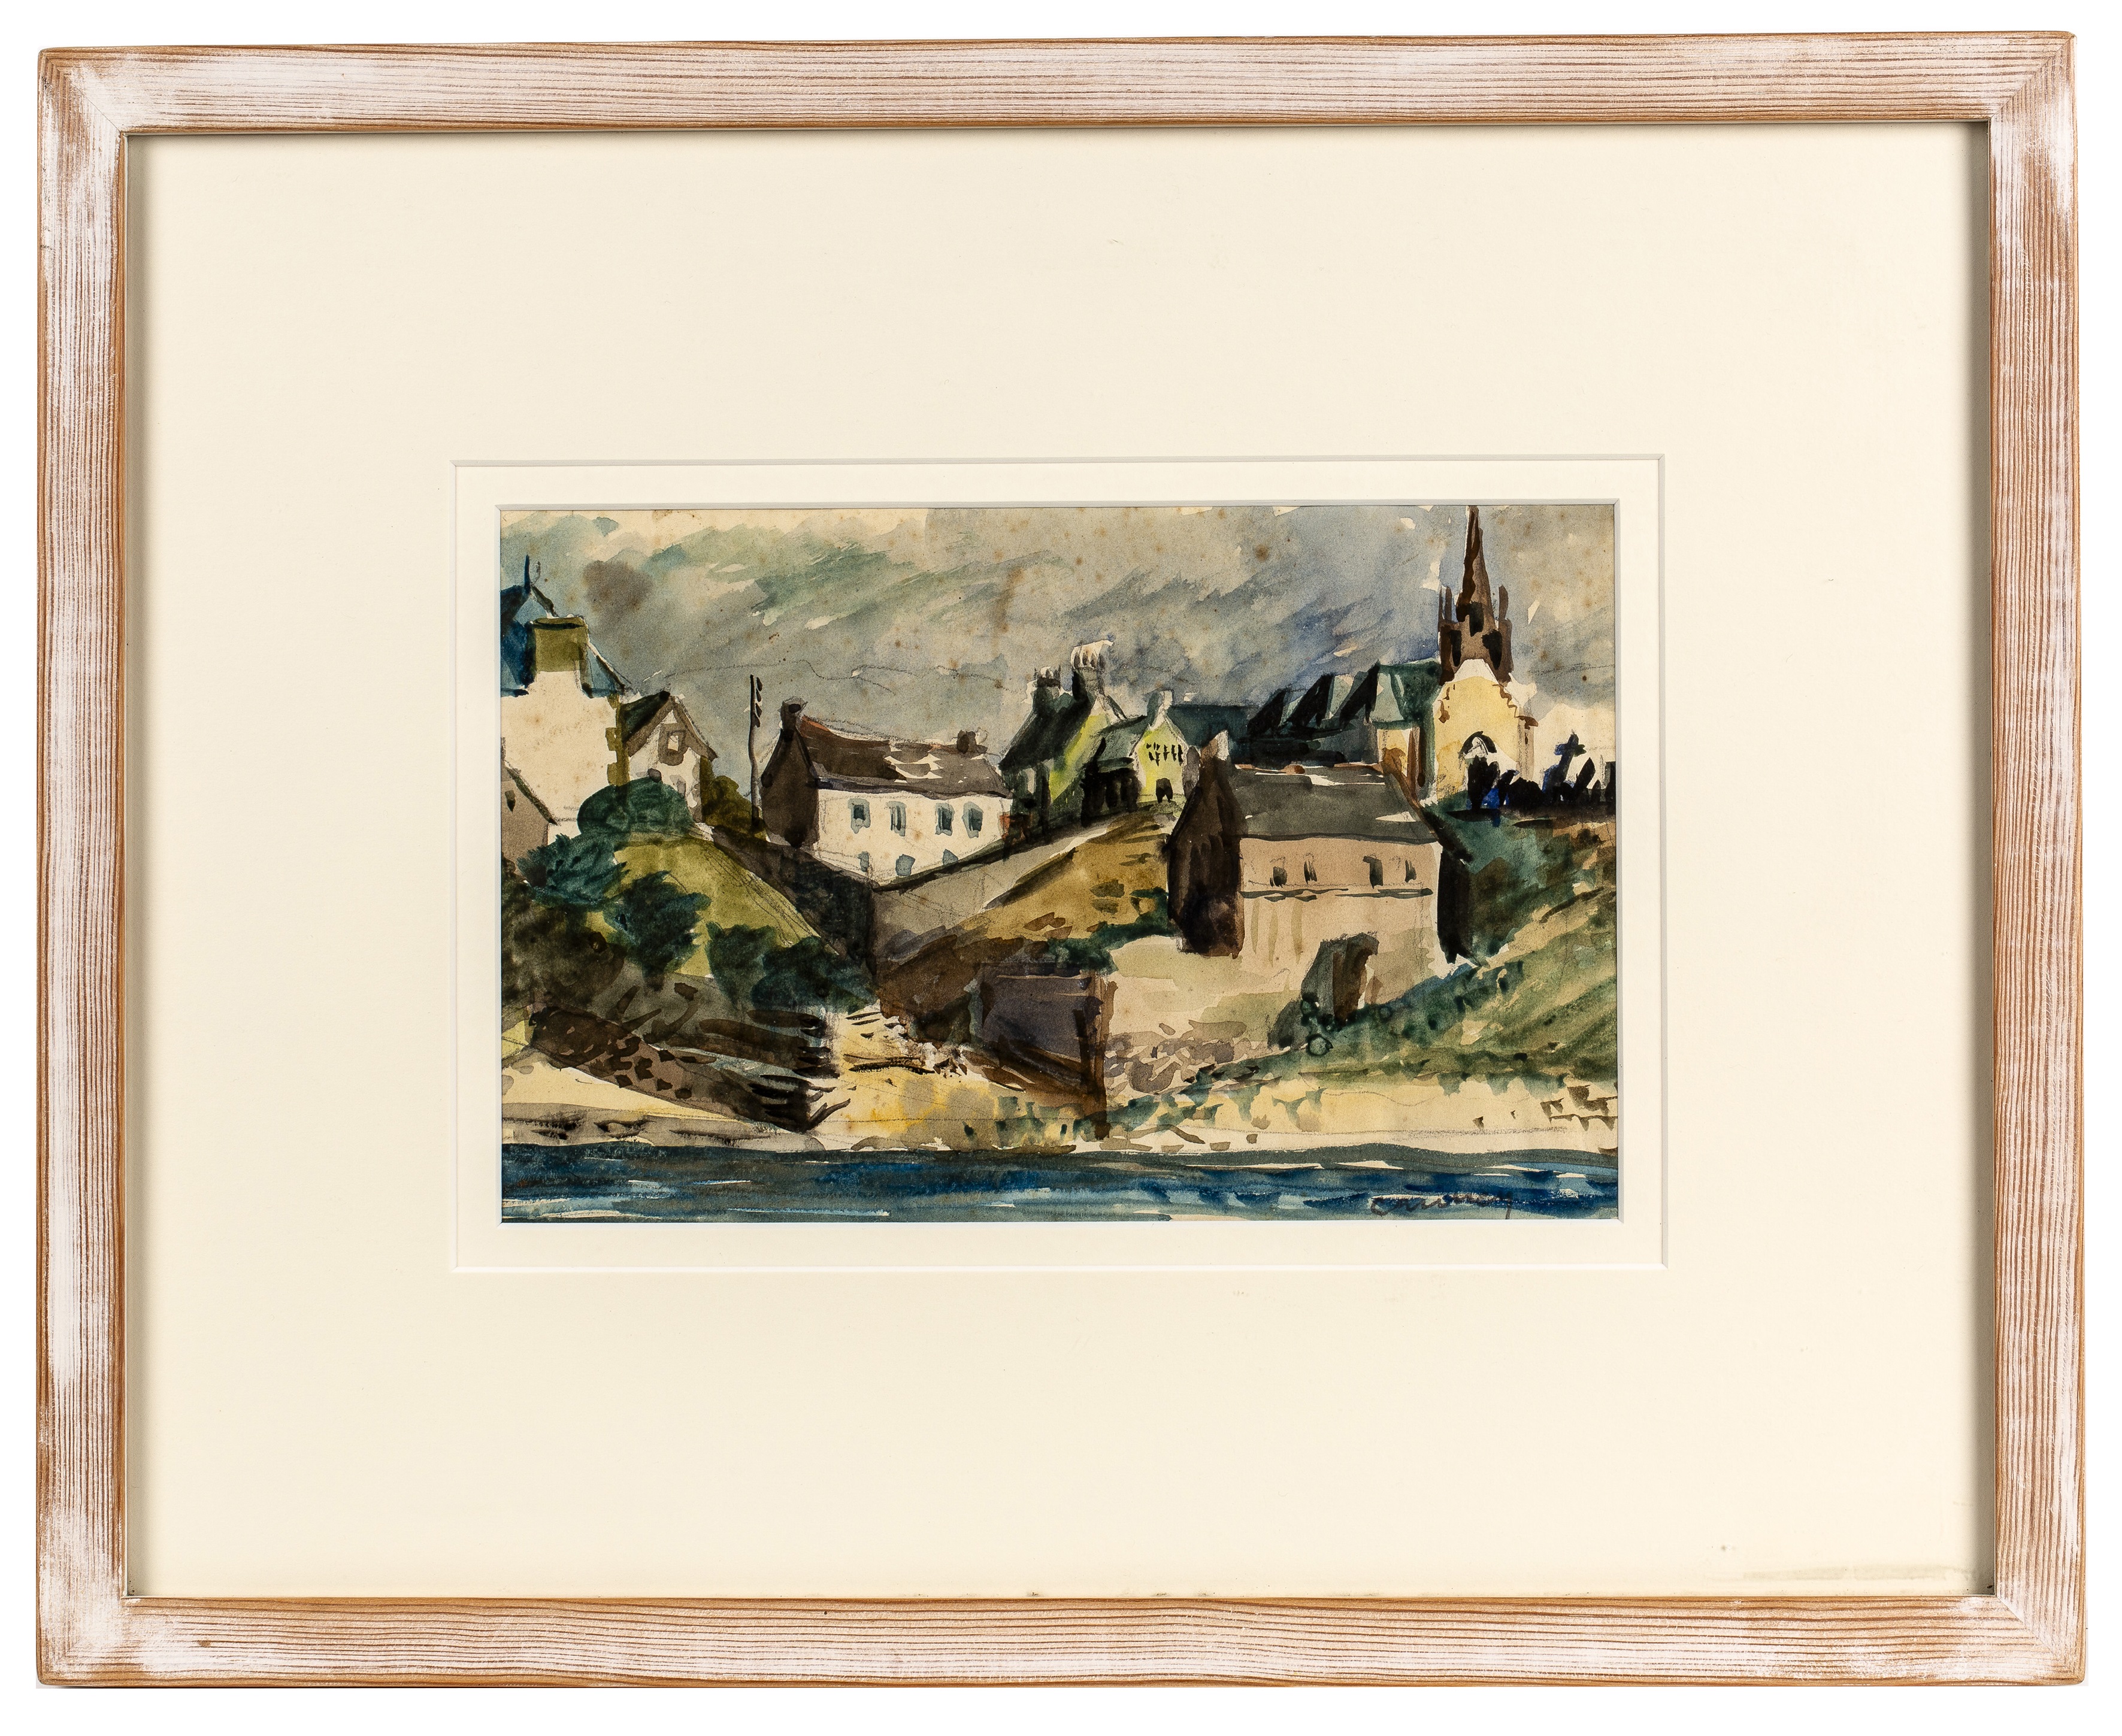 Michael Canney (1923-1999) Cornish Village signed in pencil (lower right) watercolour 16 x 25cm. - Image 2 of 3